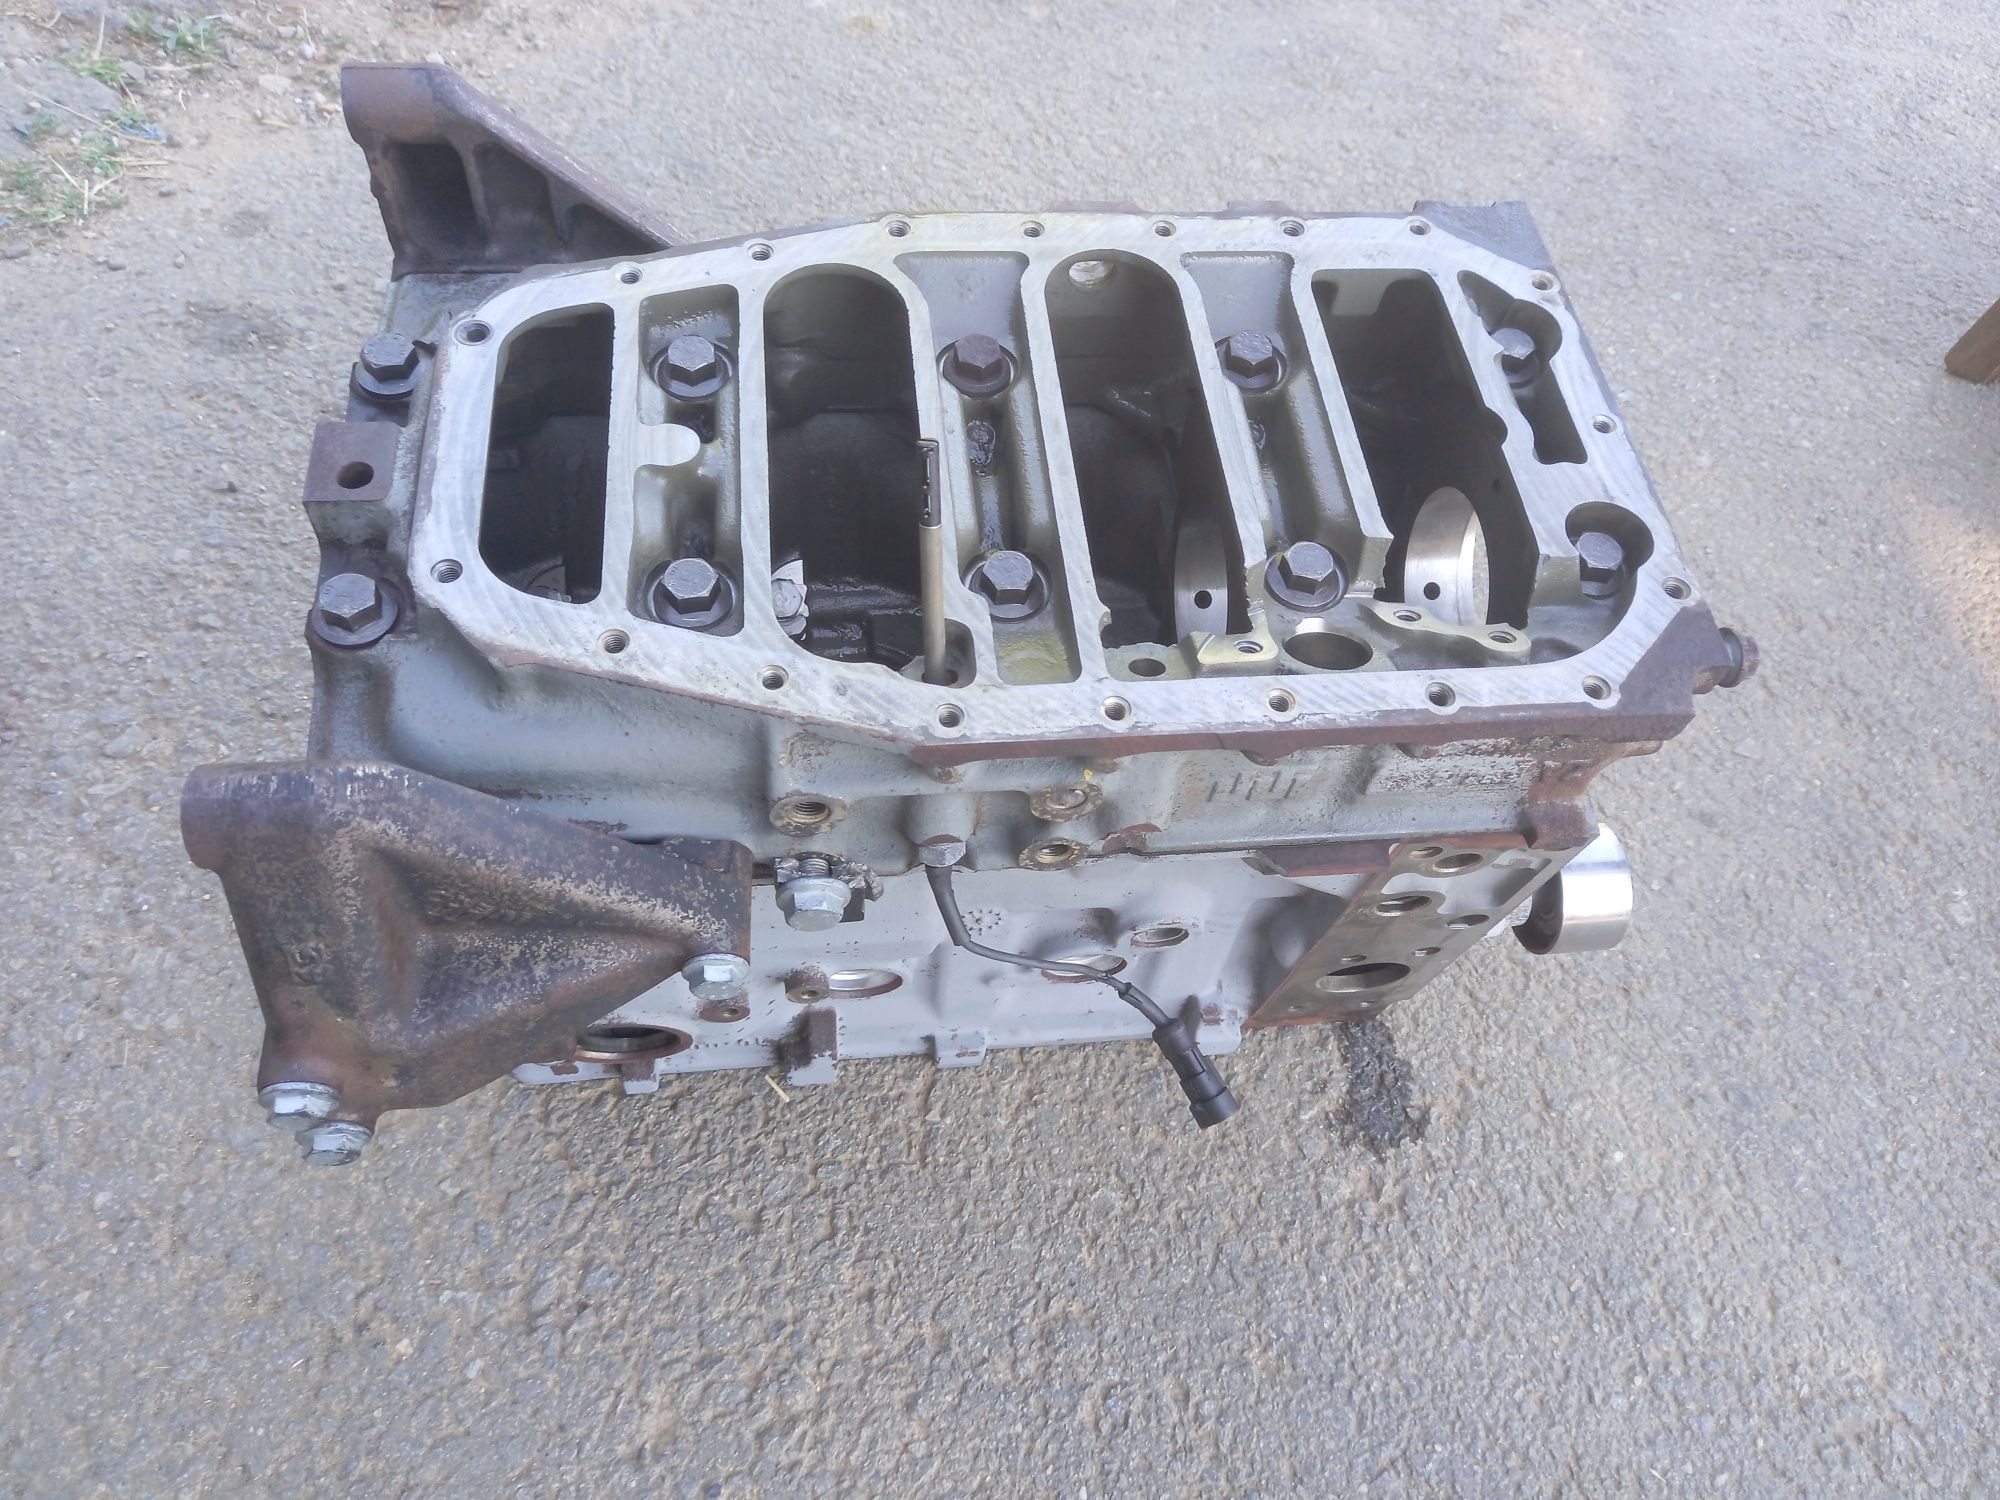 Bloc motor gol Iveco Daily 2.8 an 1999-2007 euro 3